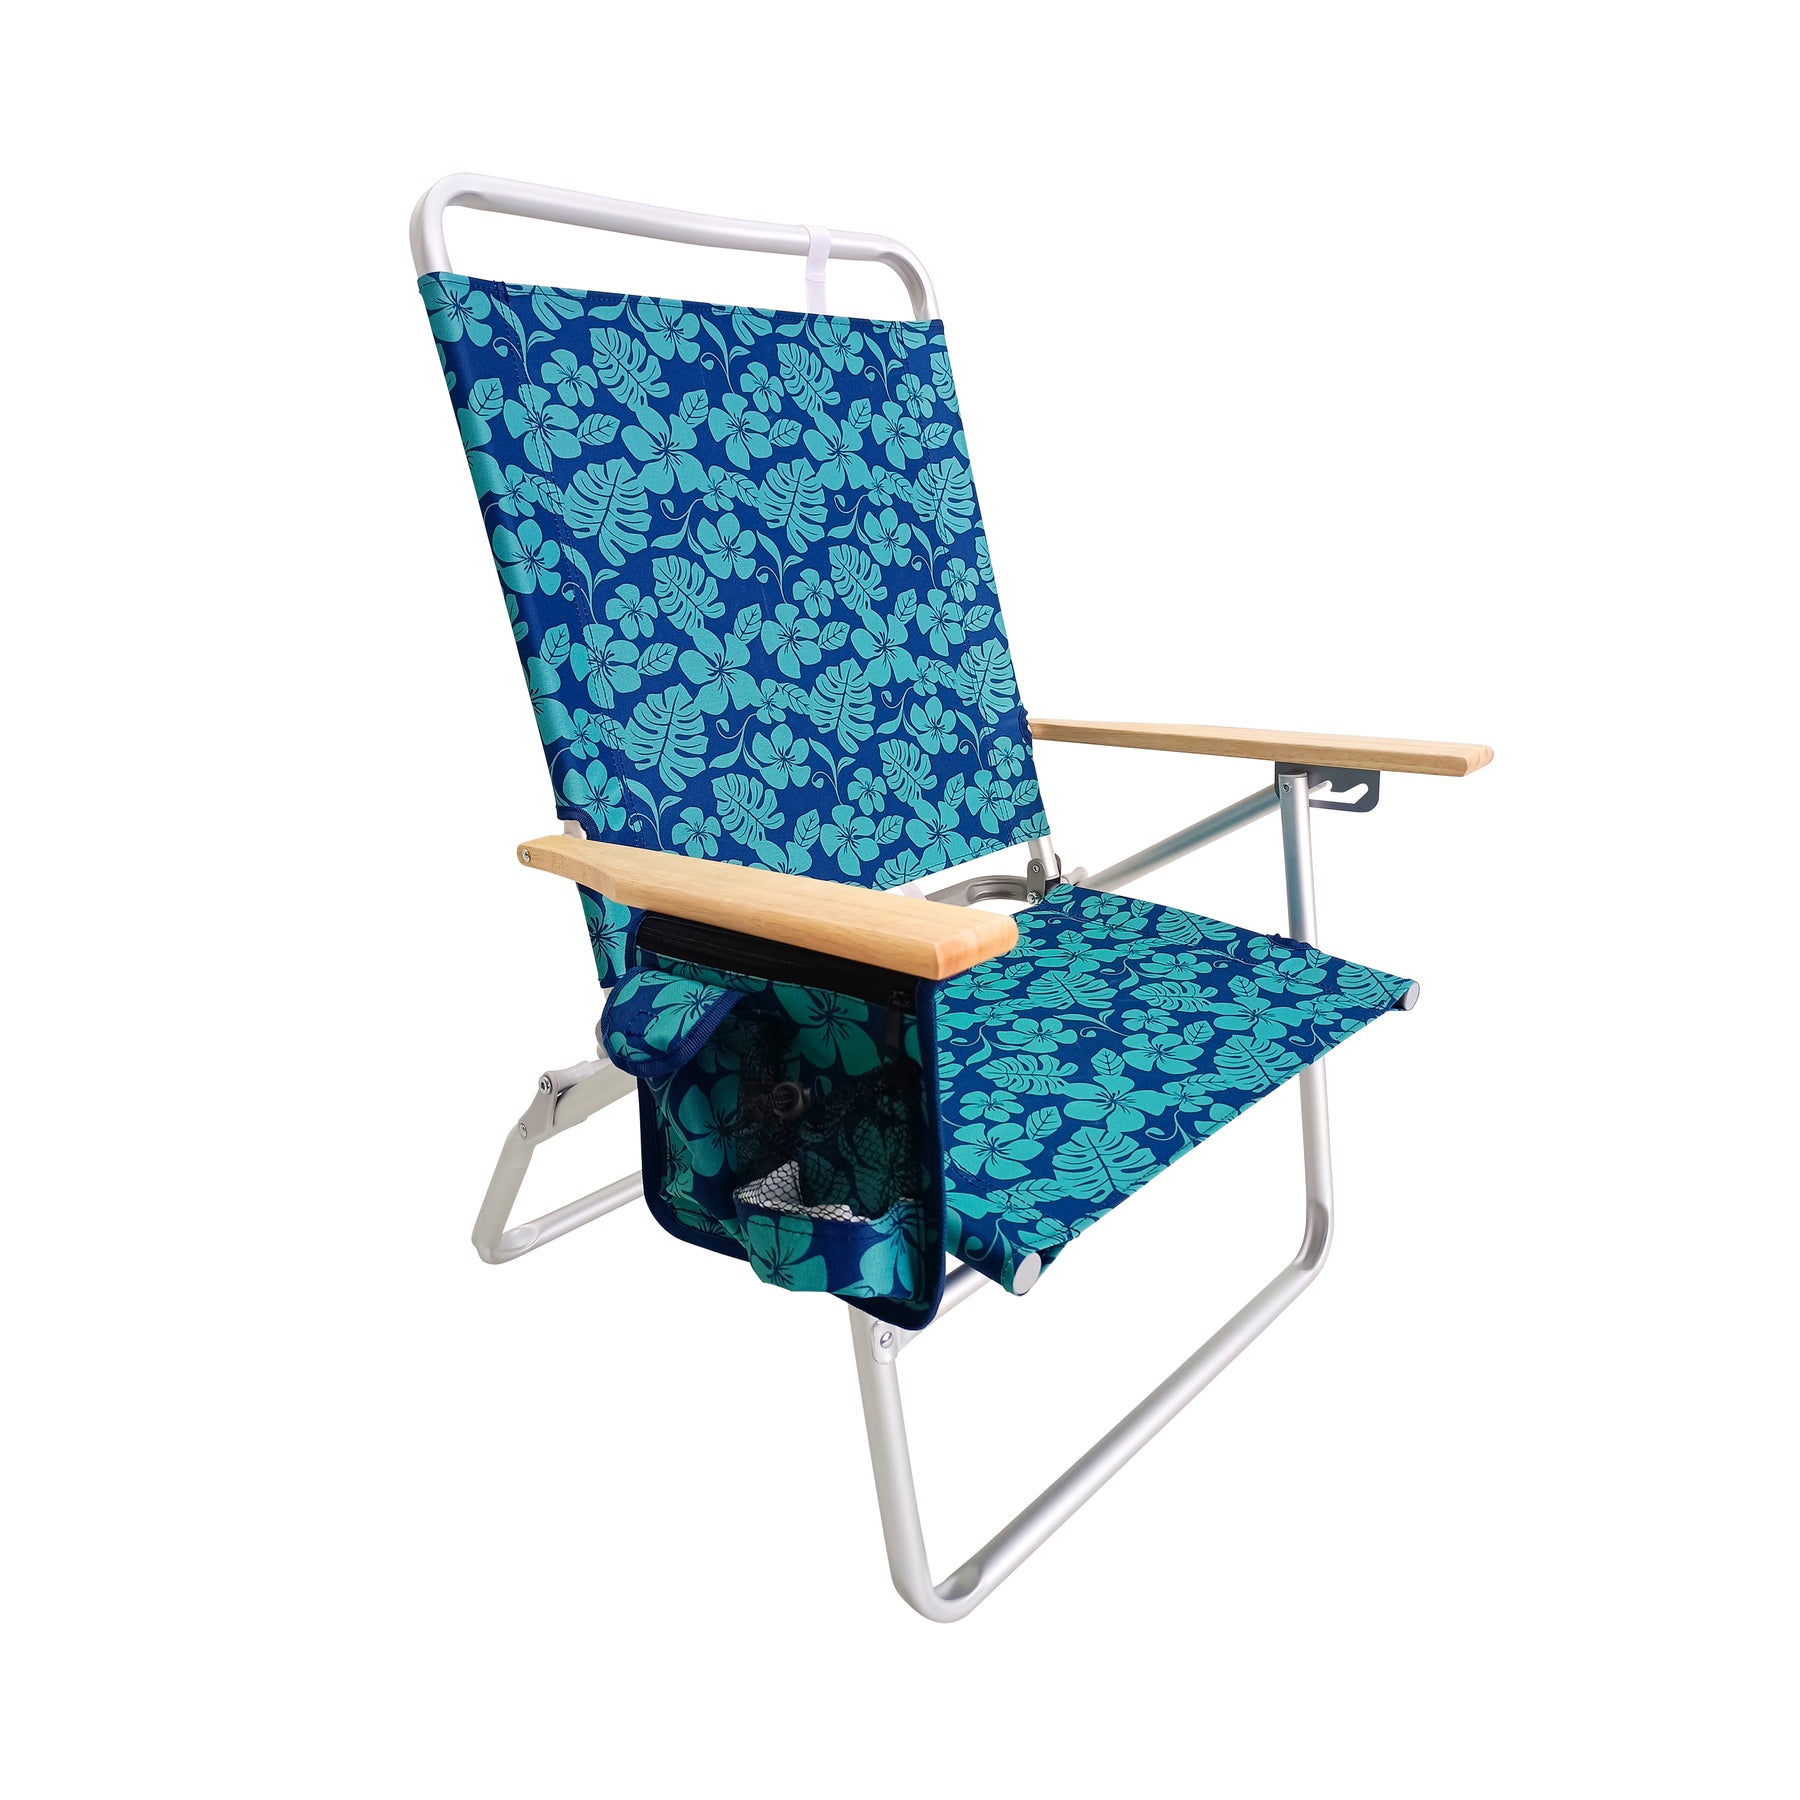 Bliss Hammocks Foldable Beach Chair with Side Pocket, 3 Reclining Positions, Storage Pouch, Phone Holder, Cup Holder, and Shoulder Strap. Blue Flowers variation is a blue color with a light blue flower pattern.